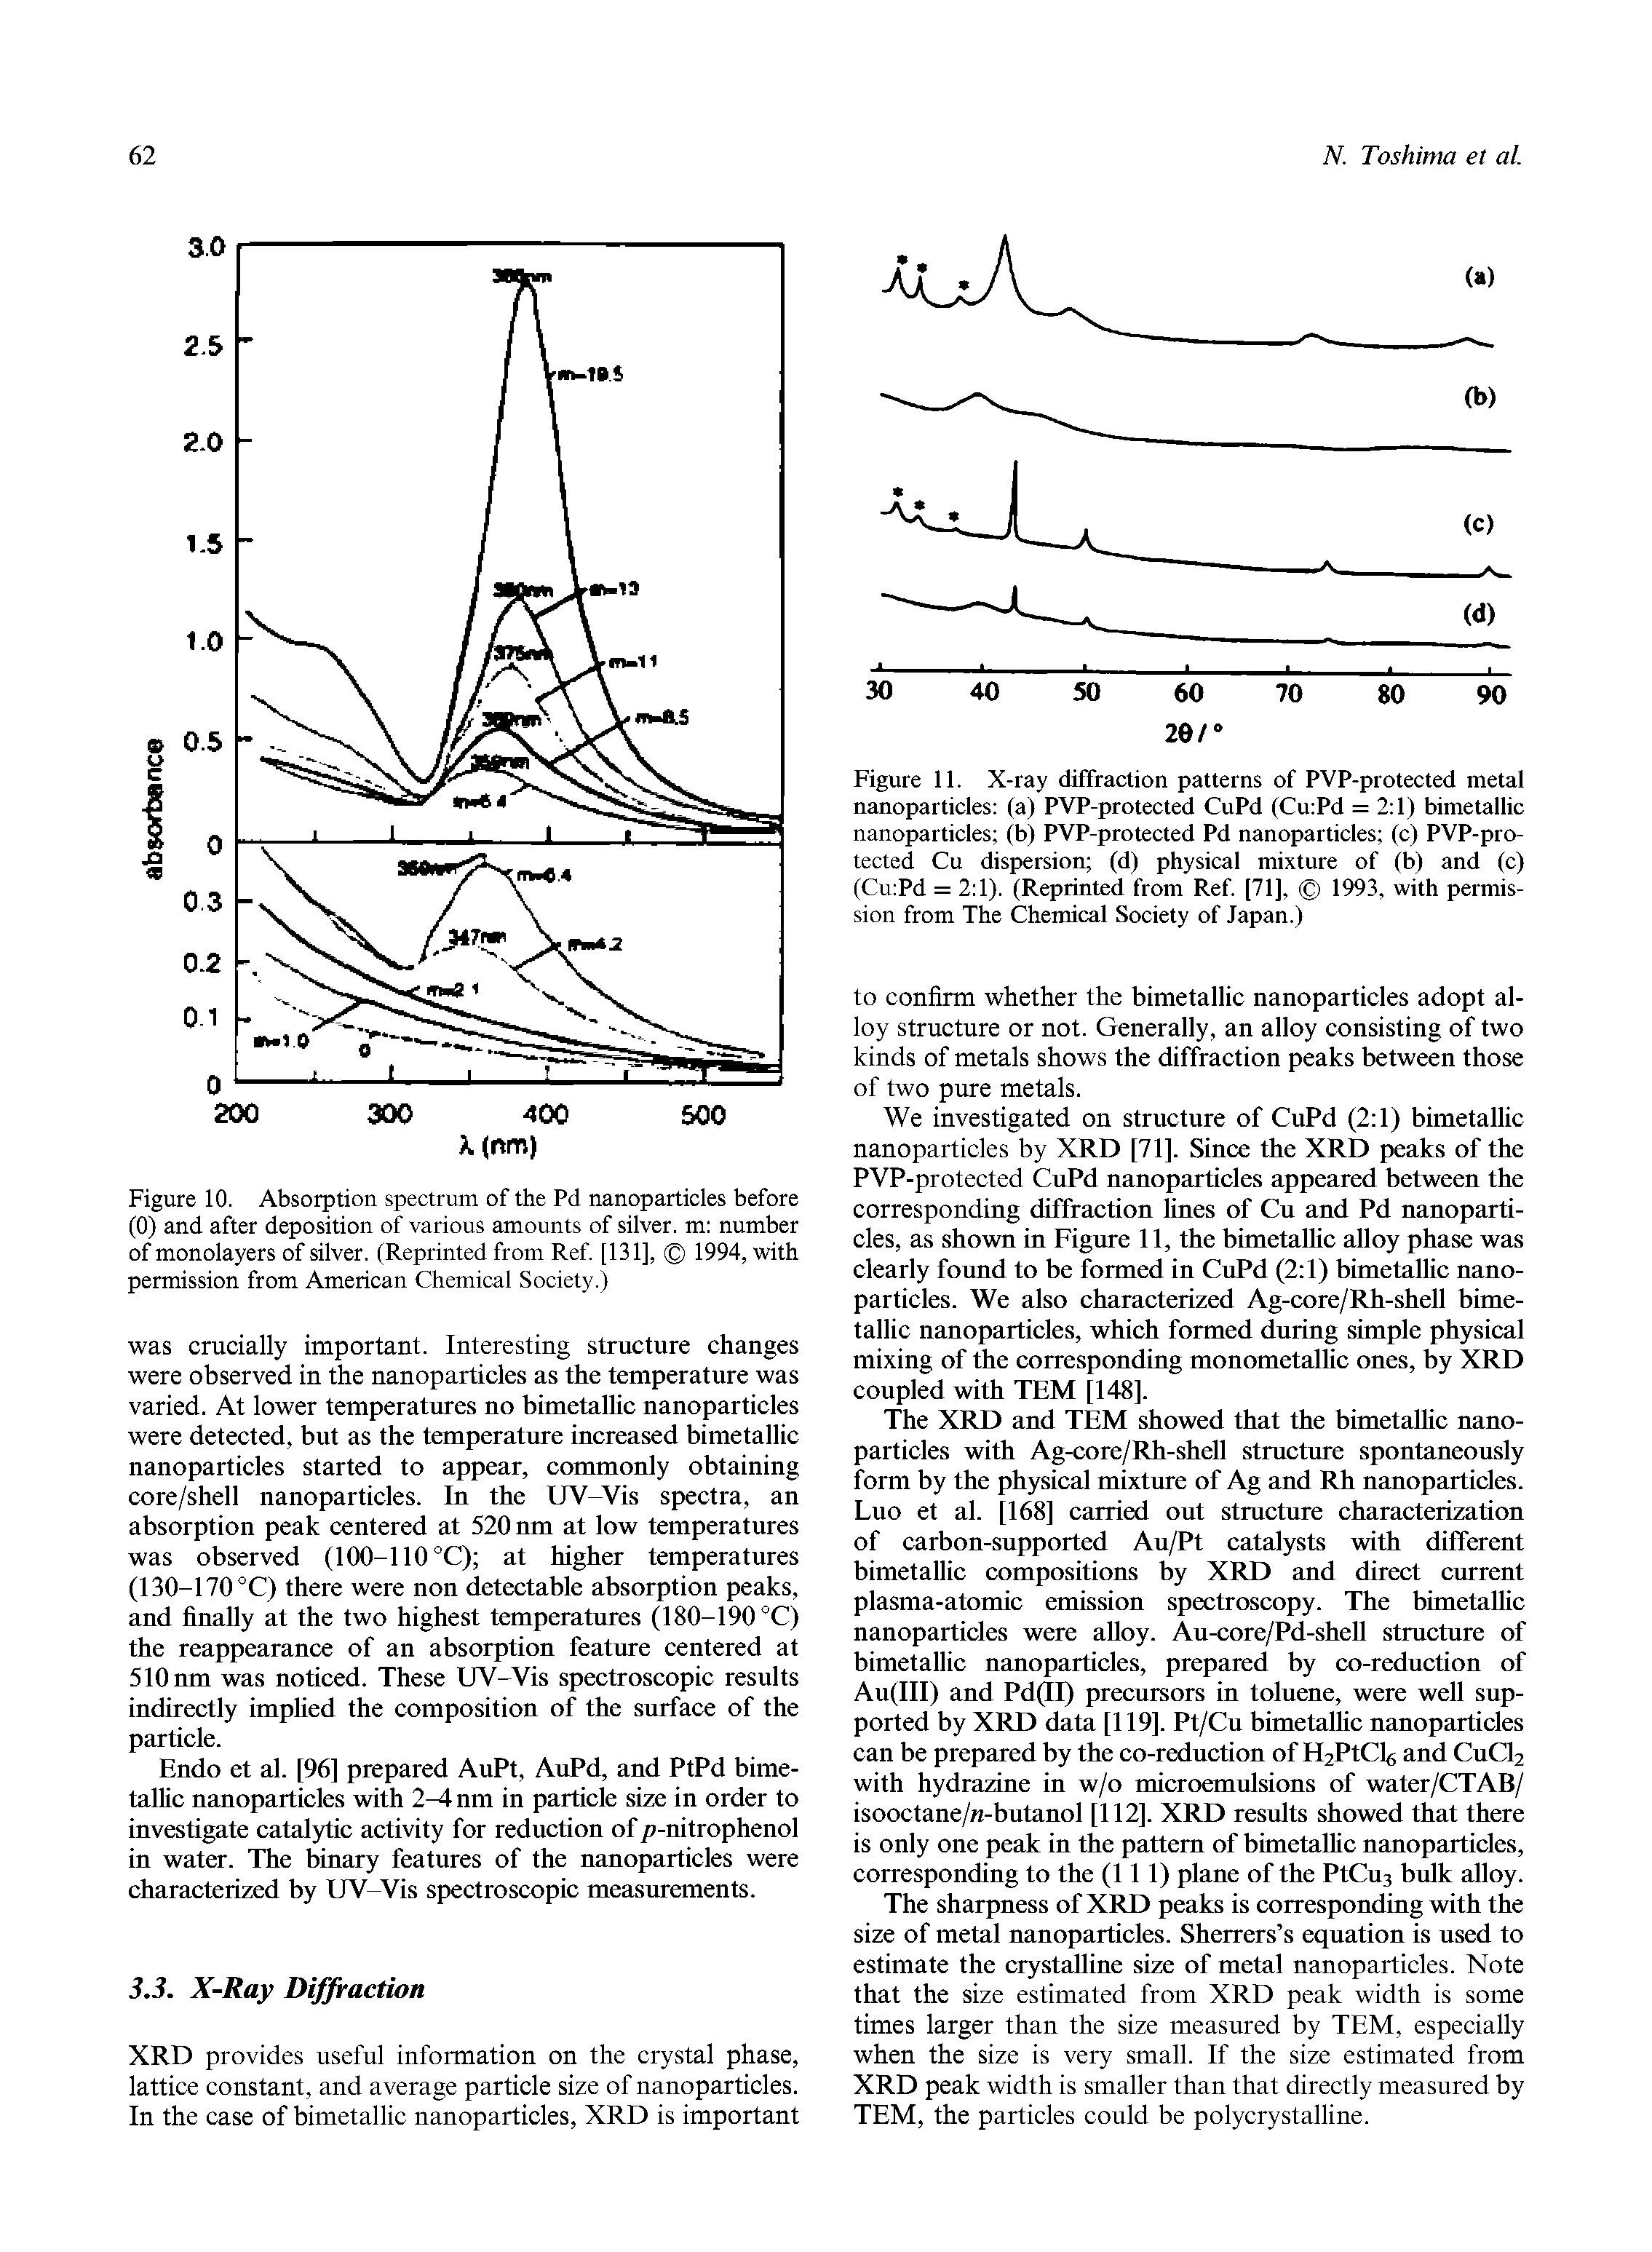 Figure 10. Absorption spectrum of the Pd nanoparticles before (0) and after deposition of various amounts of silver, m number of monolayers of silver. (Reprinted from Ref [131], 1994, with permission from American Chemical Society.)...